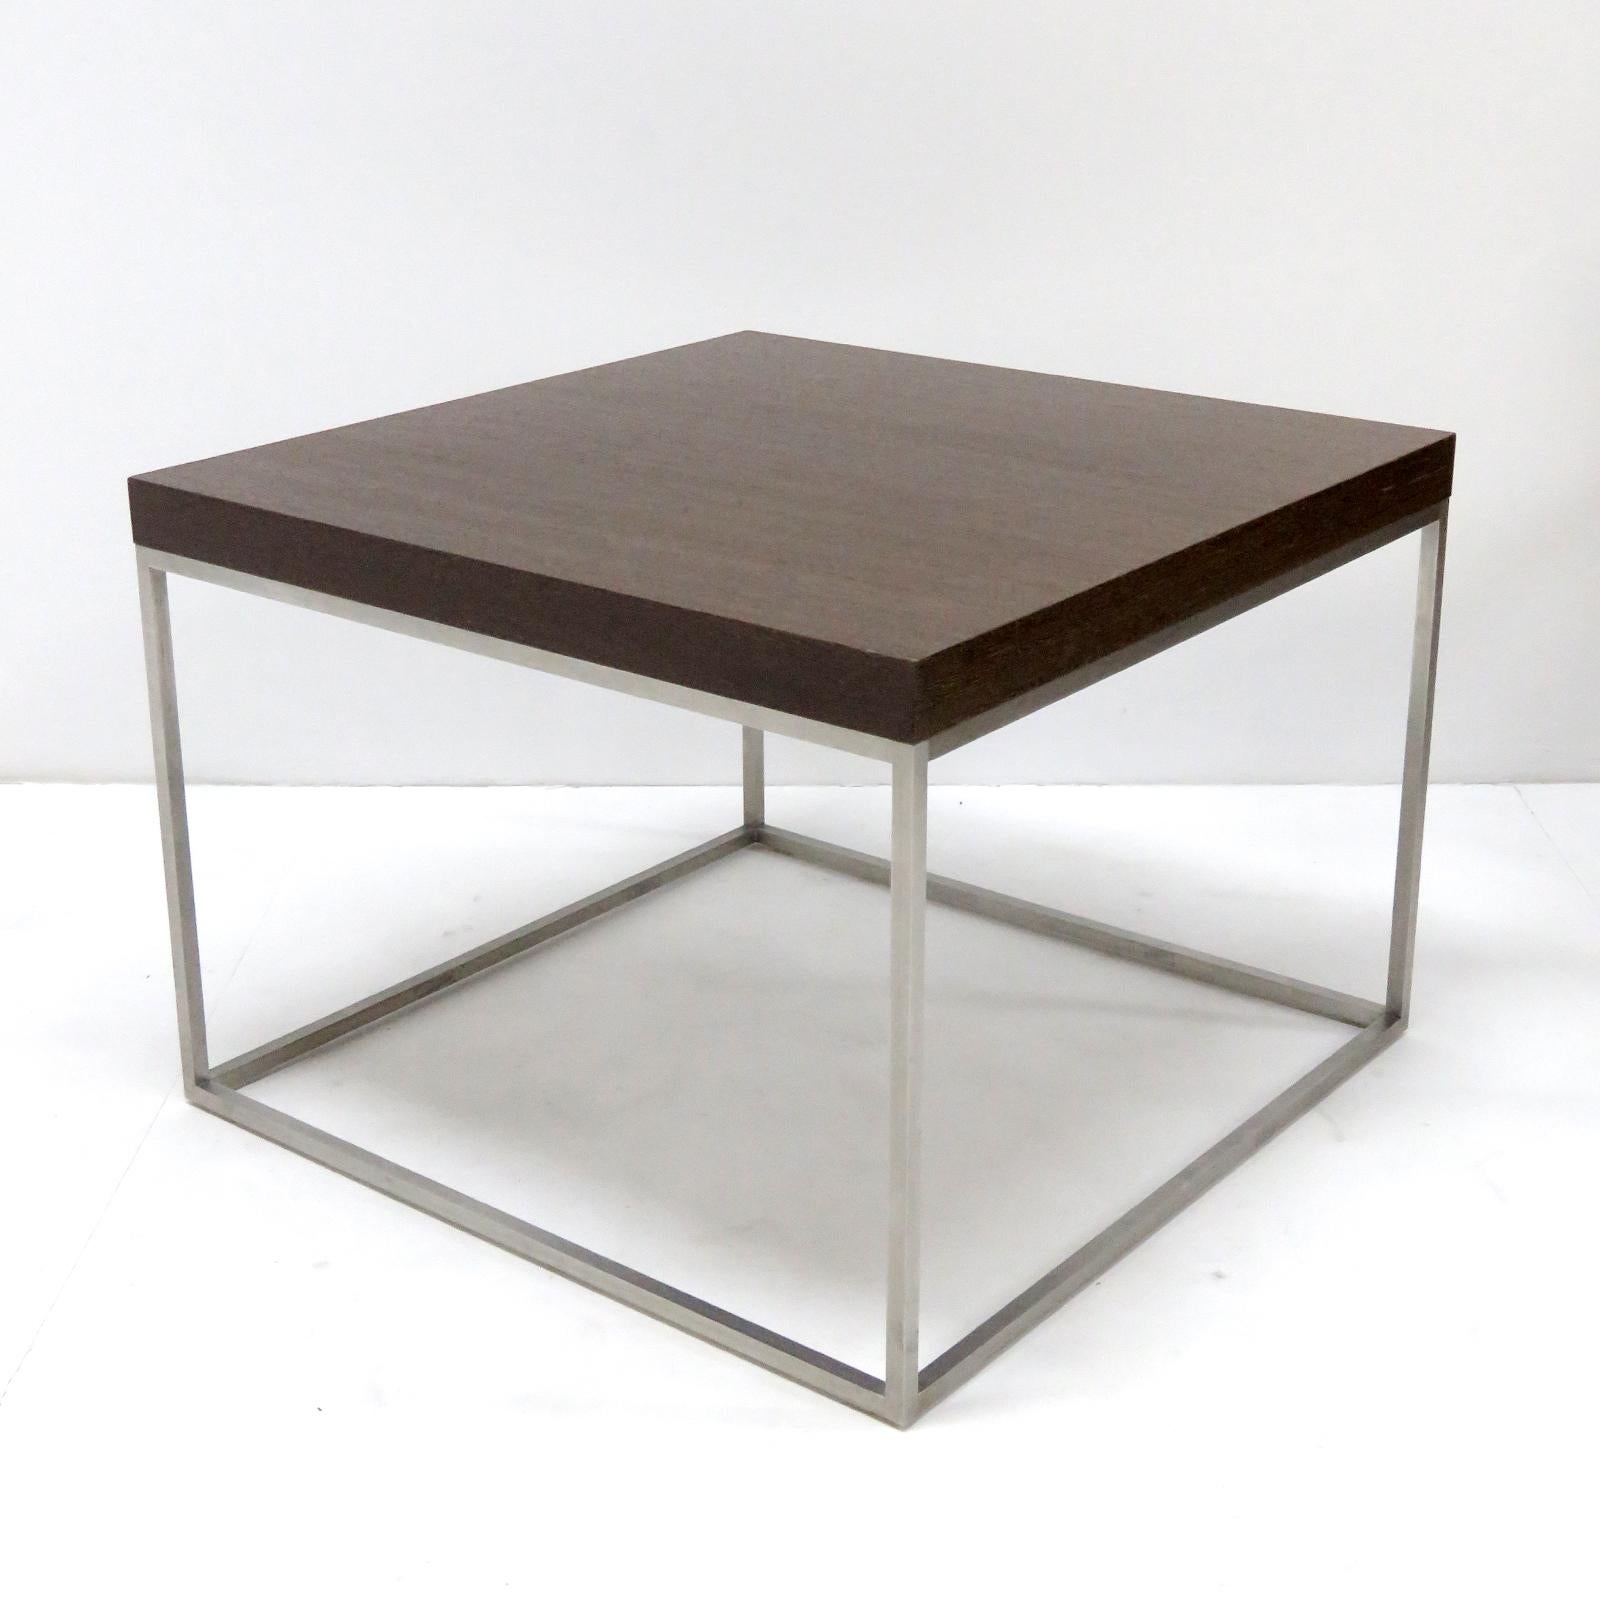 Modern Paolo Piva 'Madison Square' Coffee Table For Sale